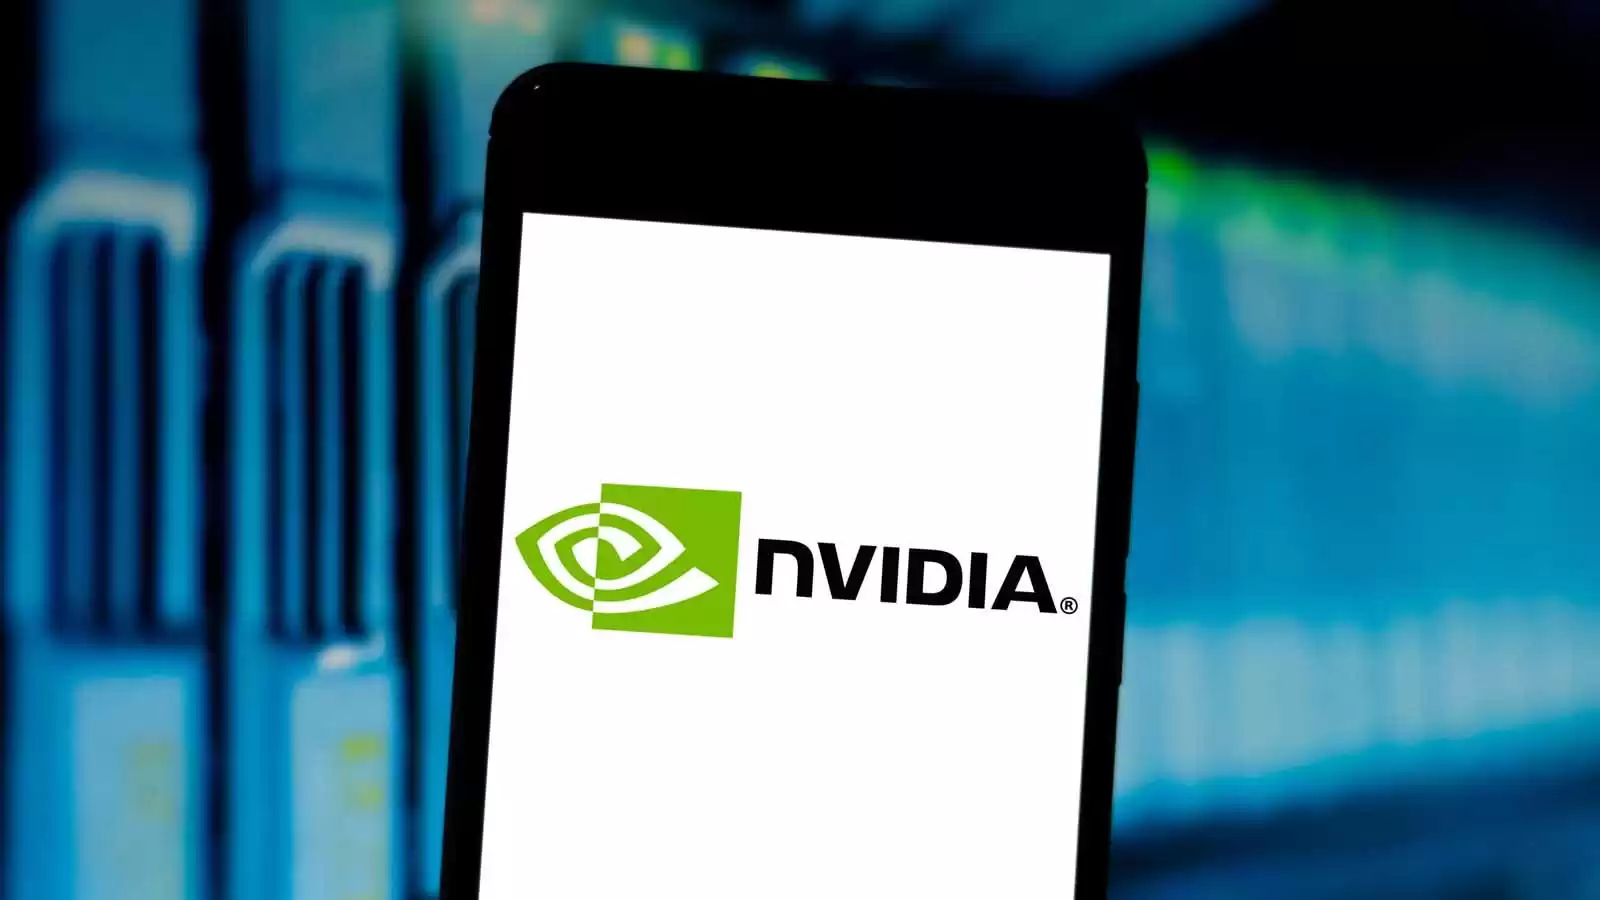 'Cathie Wood Selling Nvidia (NVDA) Shares: Should You Follow Suit?'